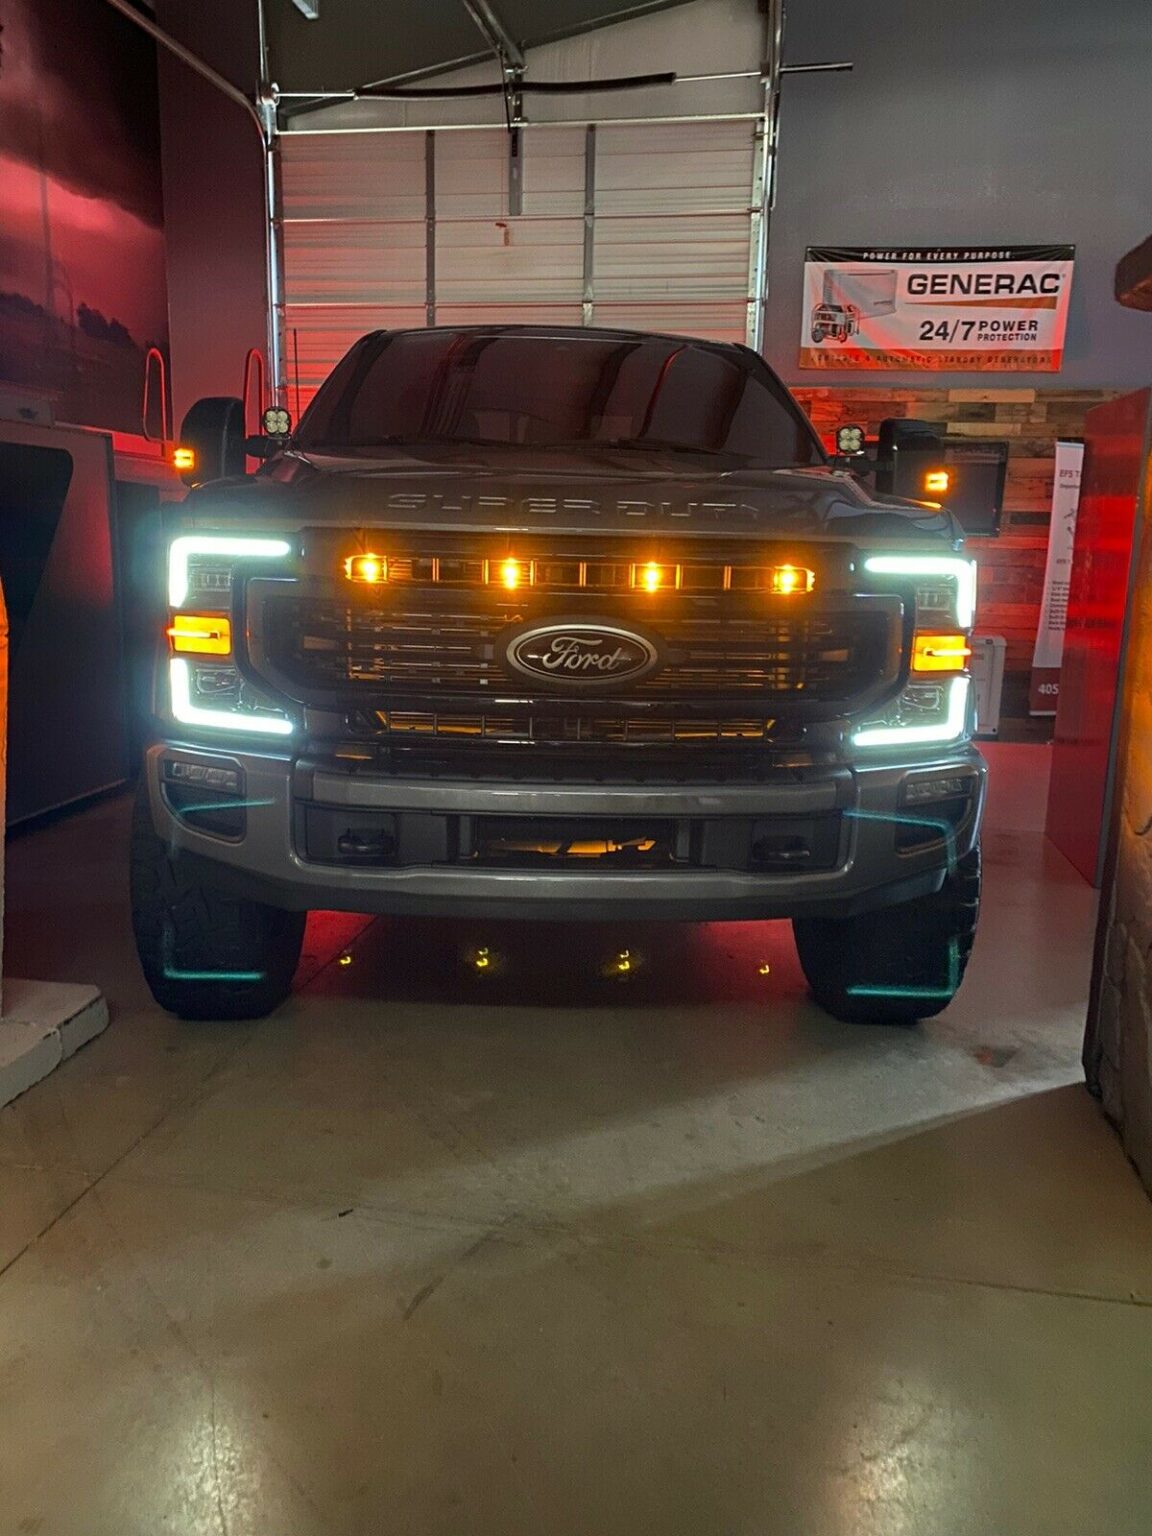 Lariat Style Grill 2020 Super Duty Raptor Style Grille Light